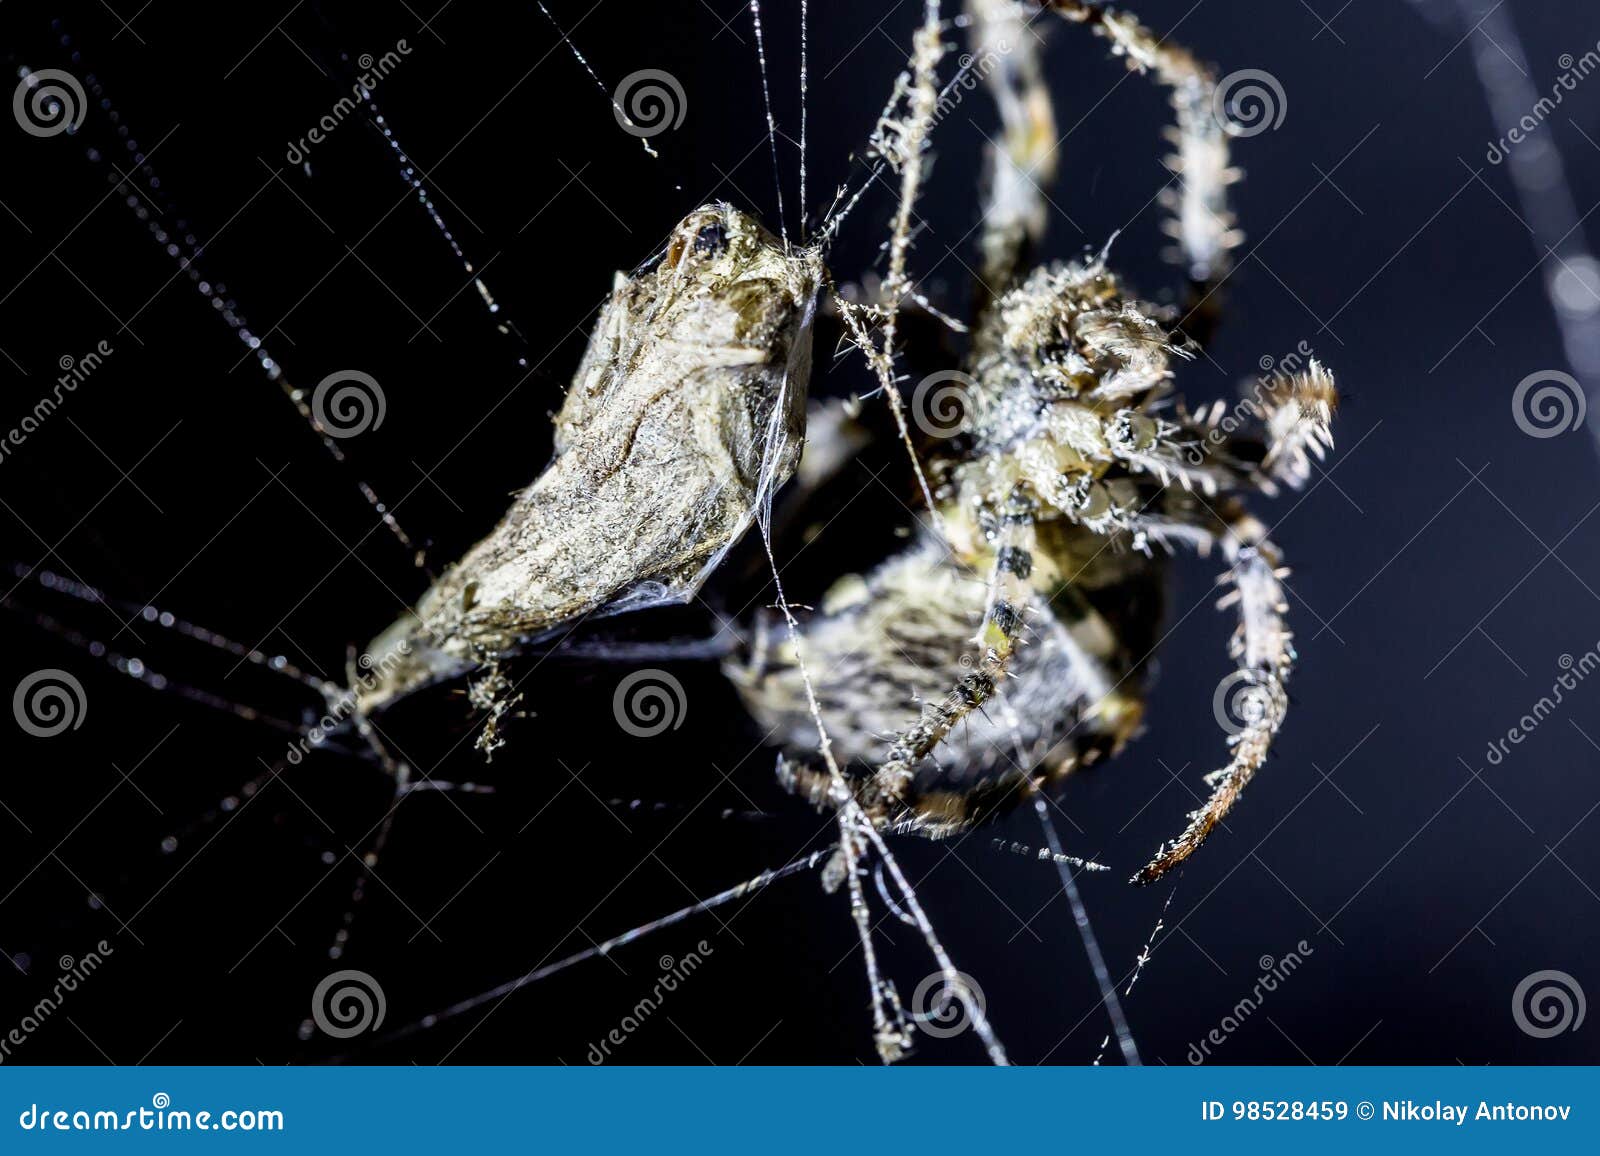 Spider Attacks Butterfly Sacrifice in Spider`s Web on Black Background.  Arachnid in the Web. Extreme Close Up Macro Image. Stock Image - Image of  araneus, arachnid: 98528459